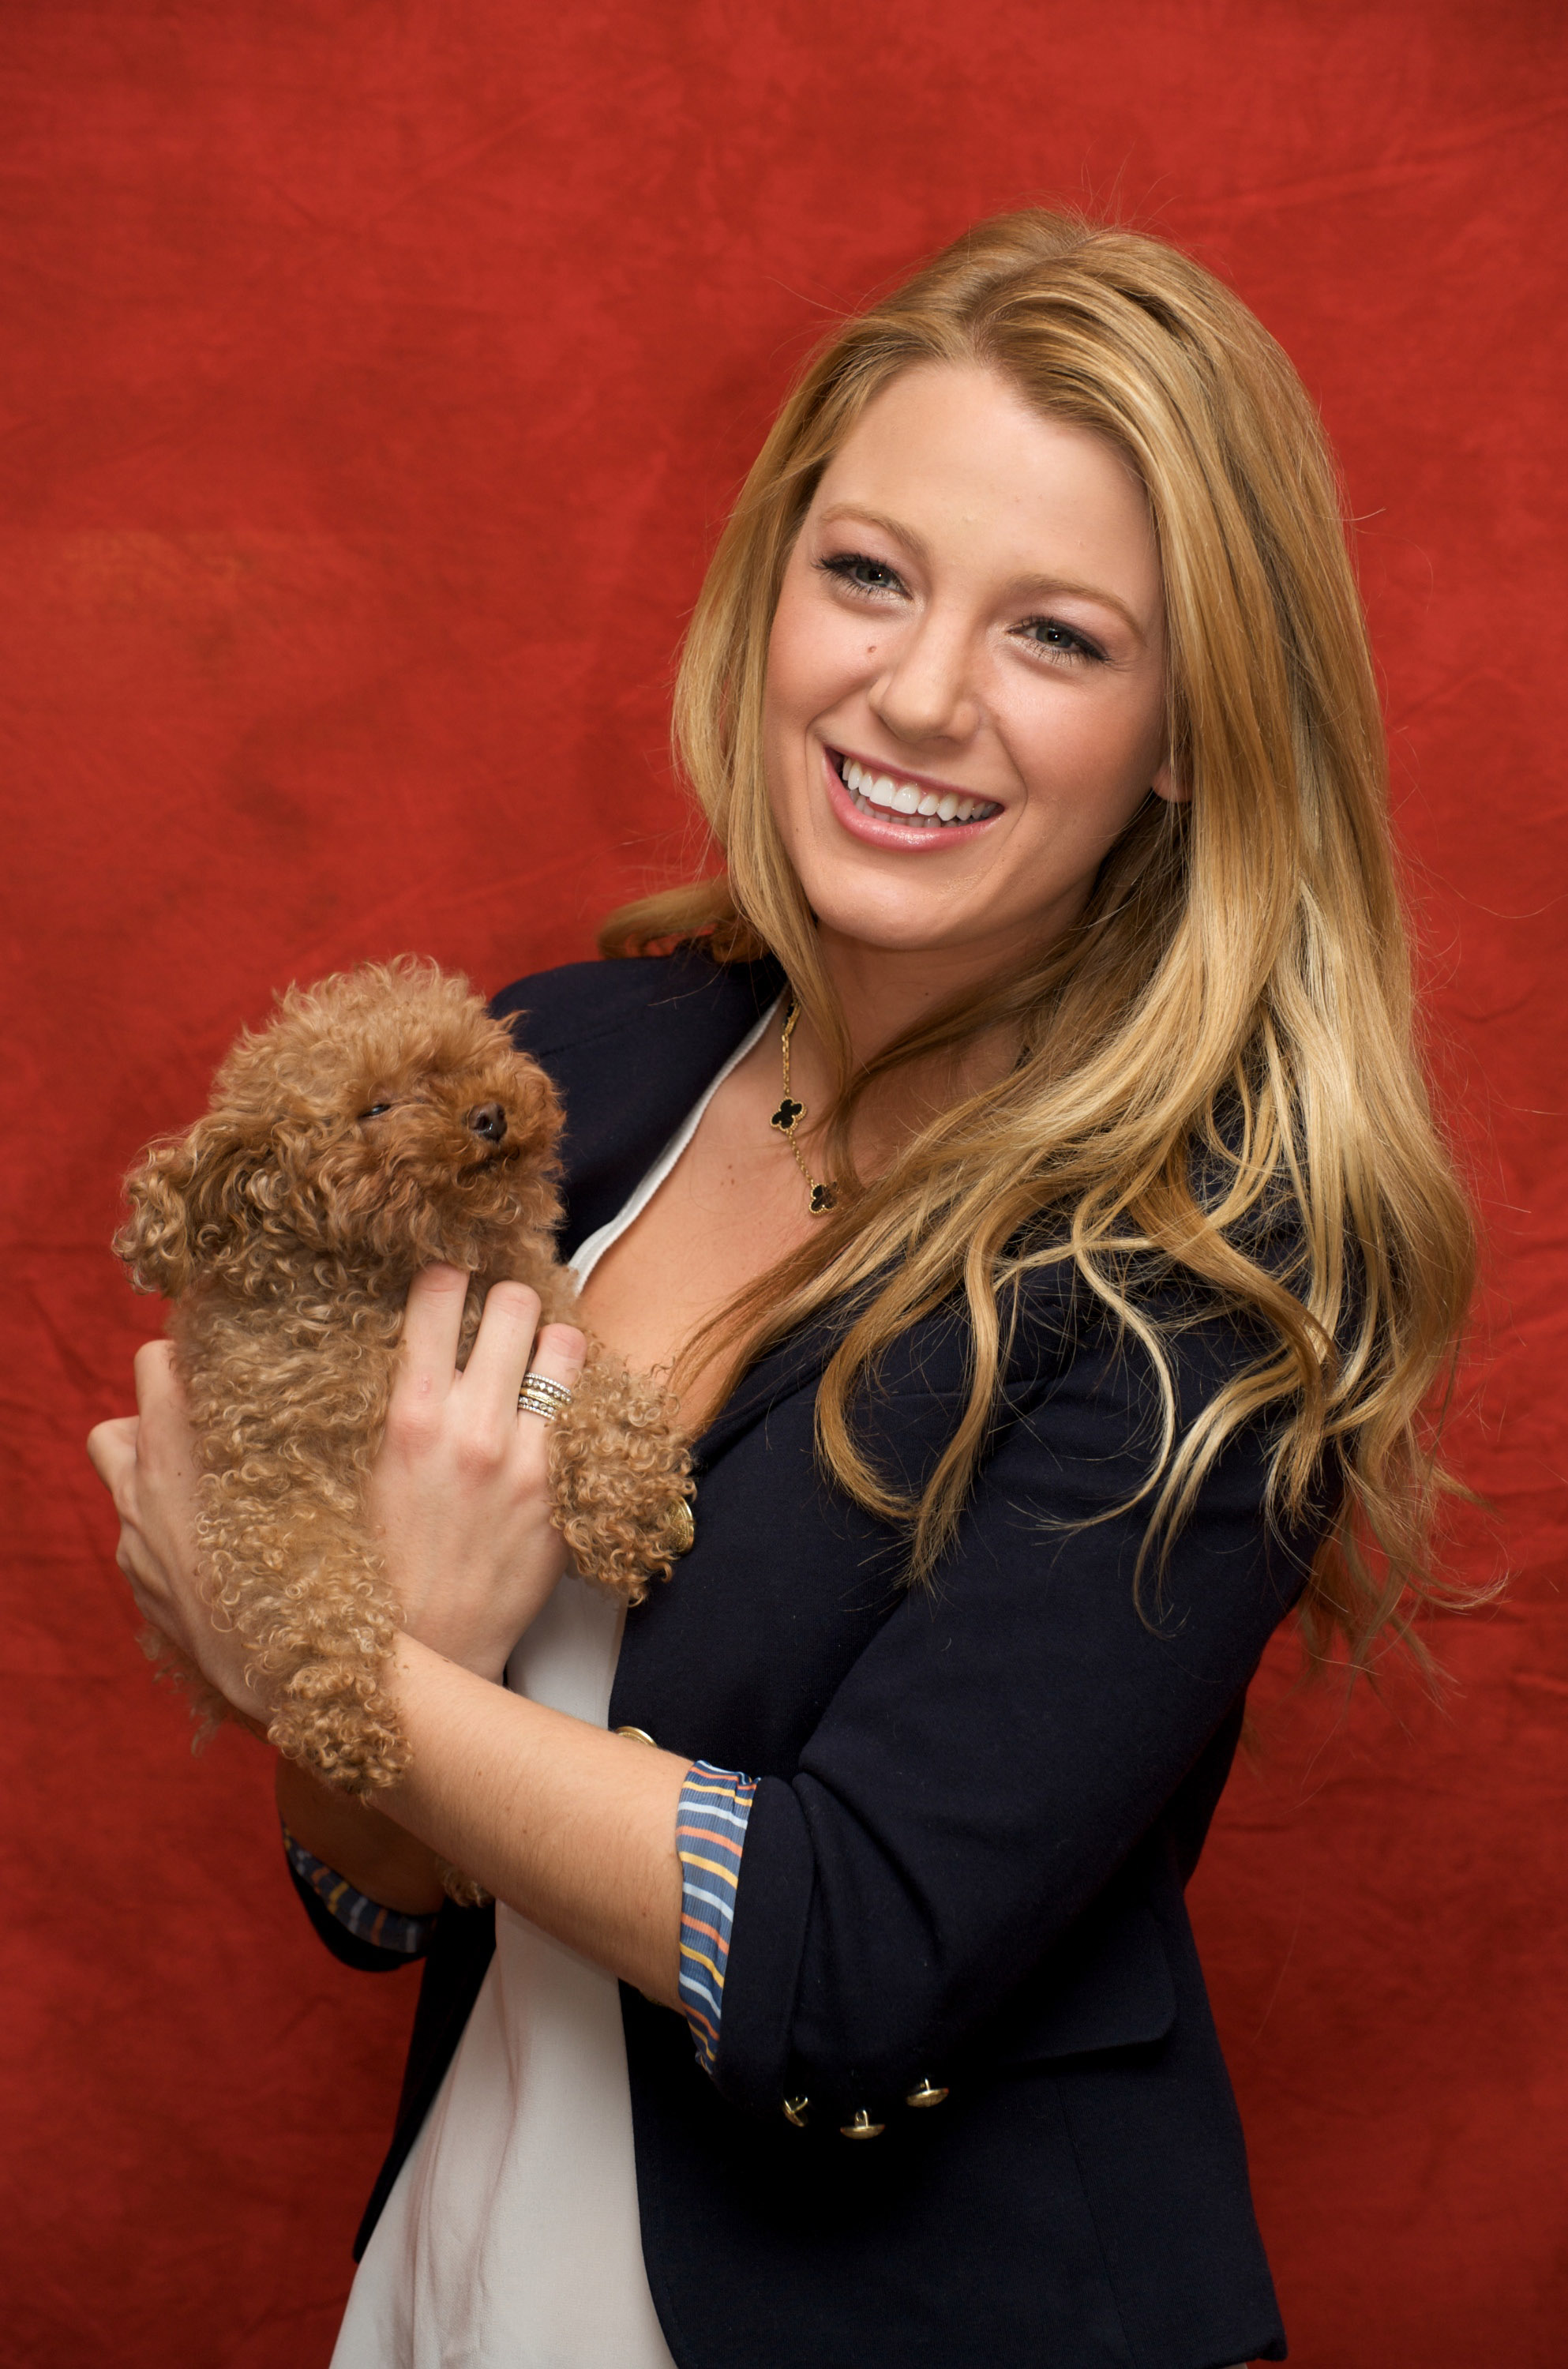 Blake Lively carrying her brown poodle puppy